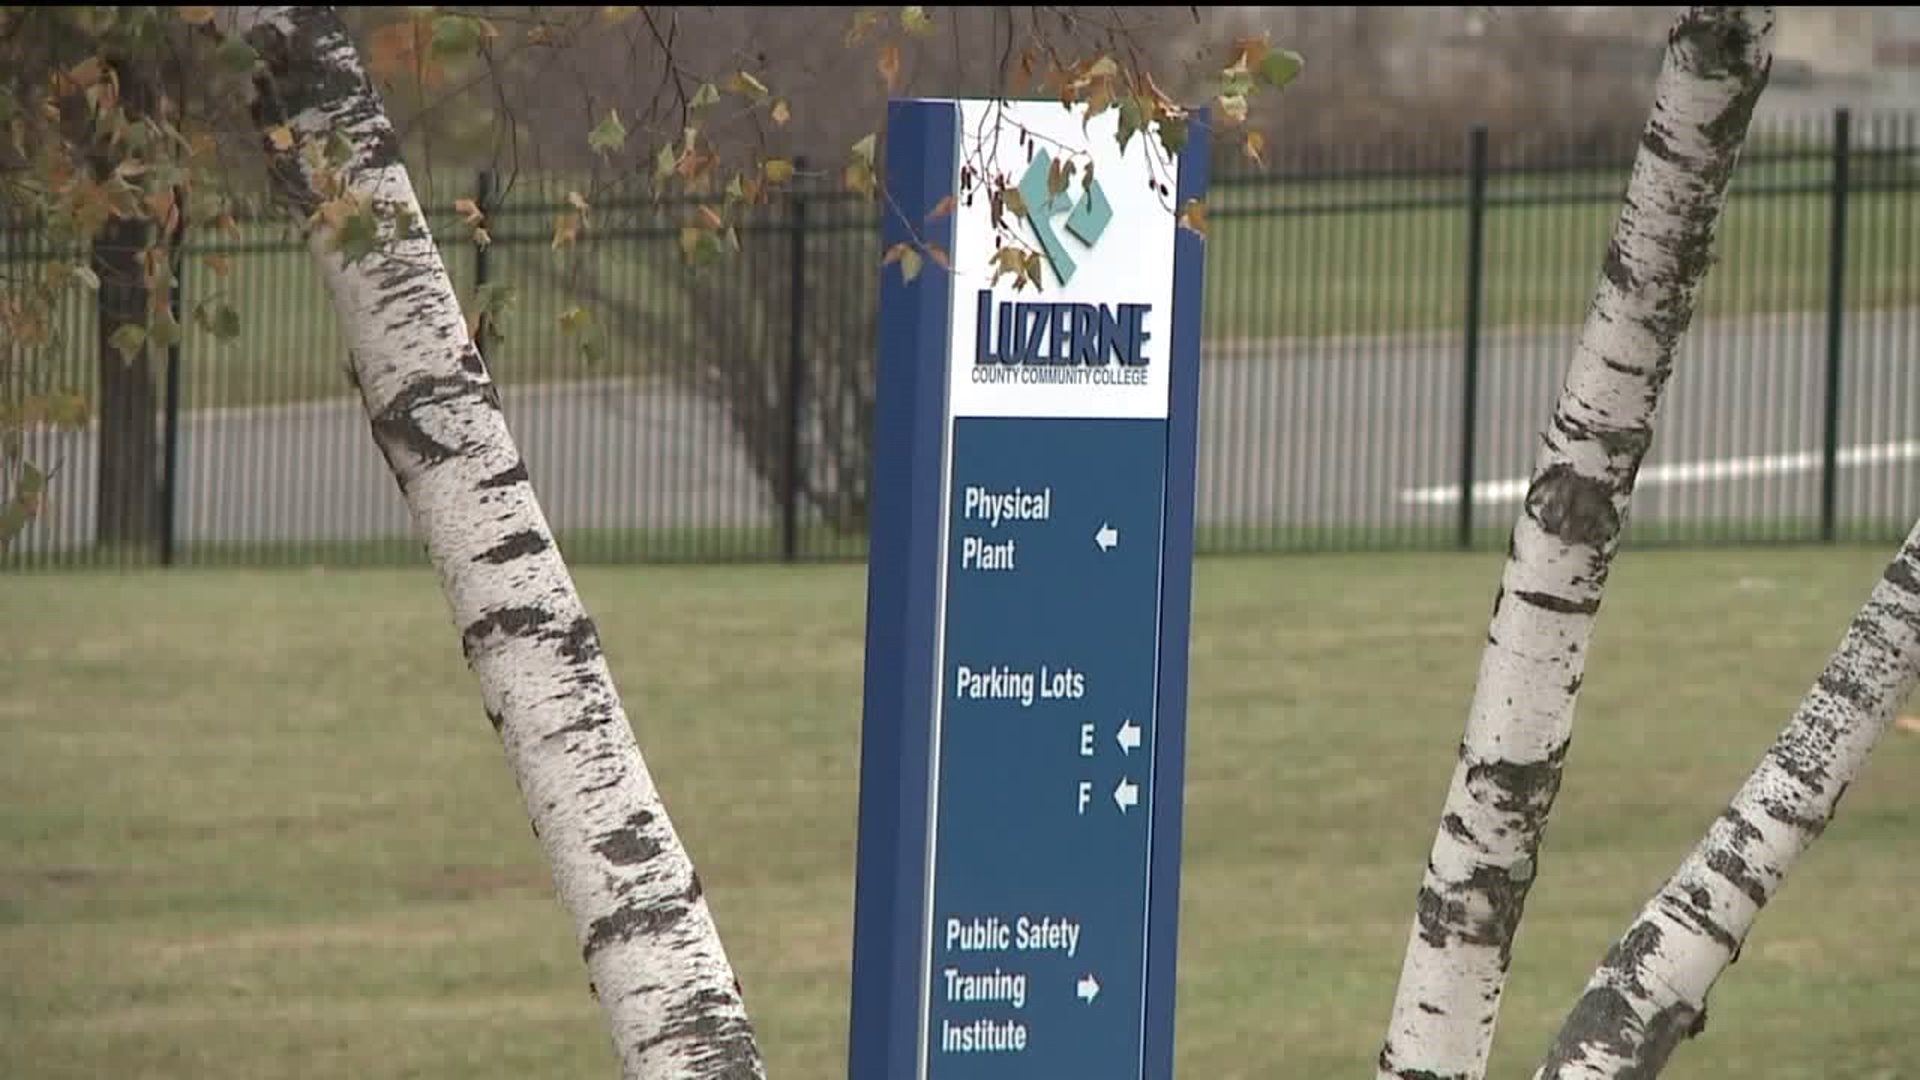 Alert Sent After Student Brings Gun to LCCC Campus